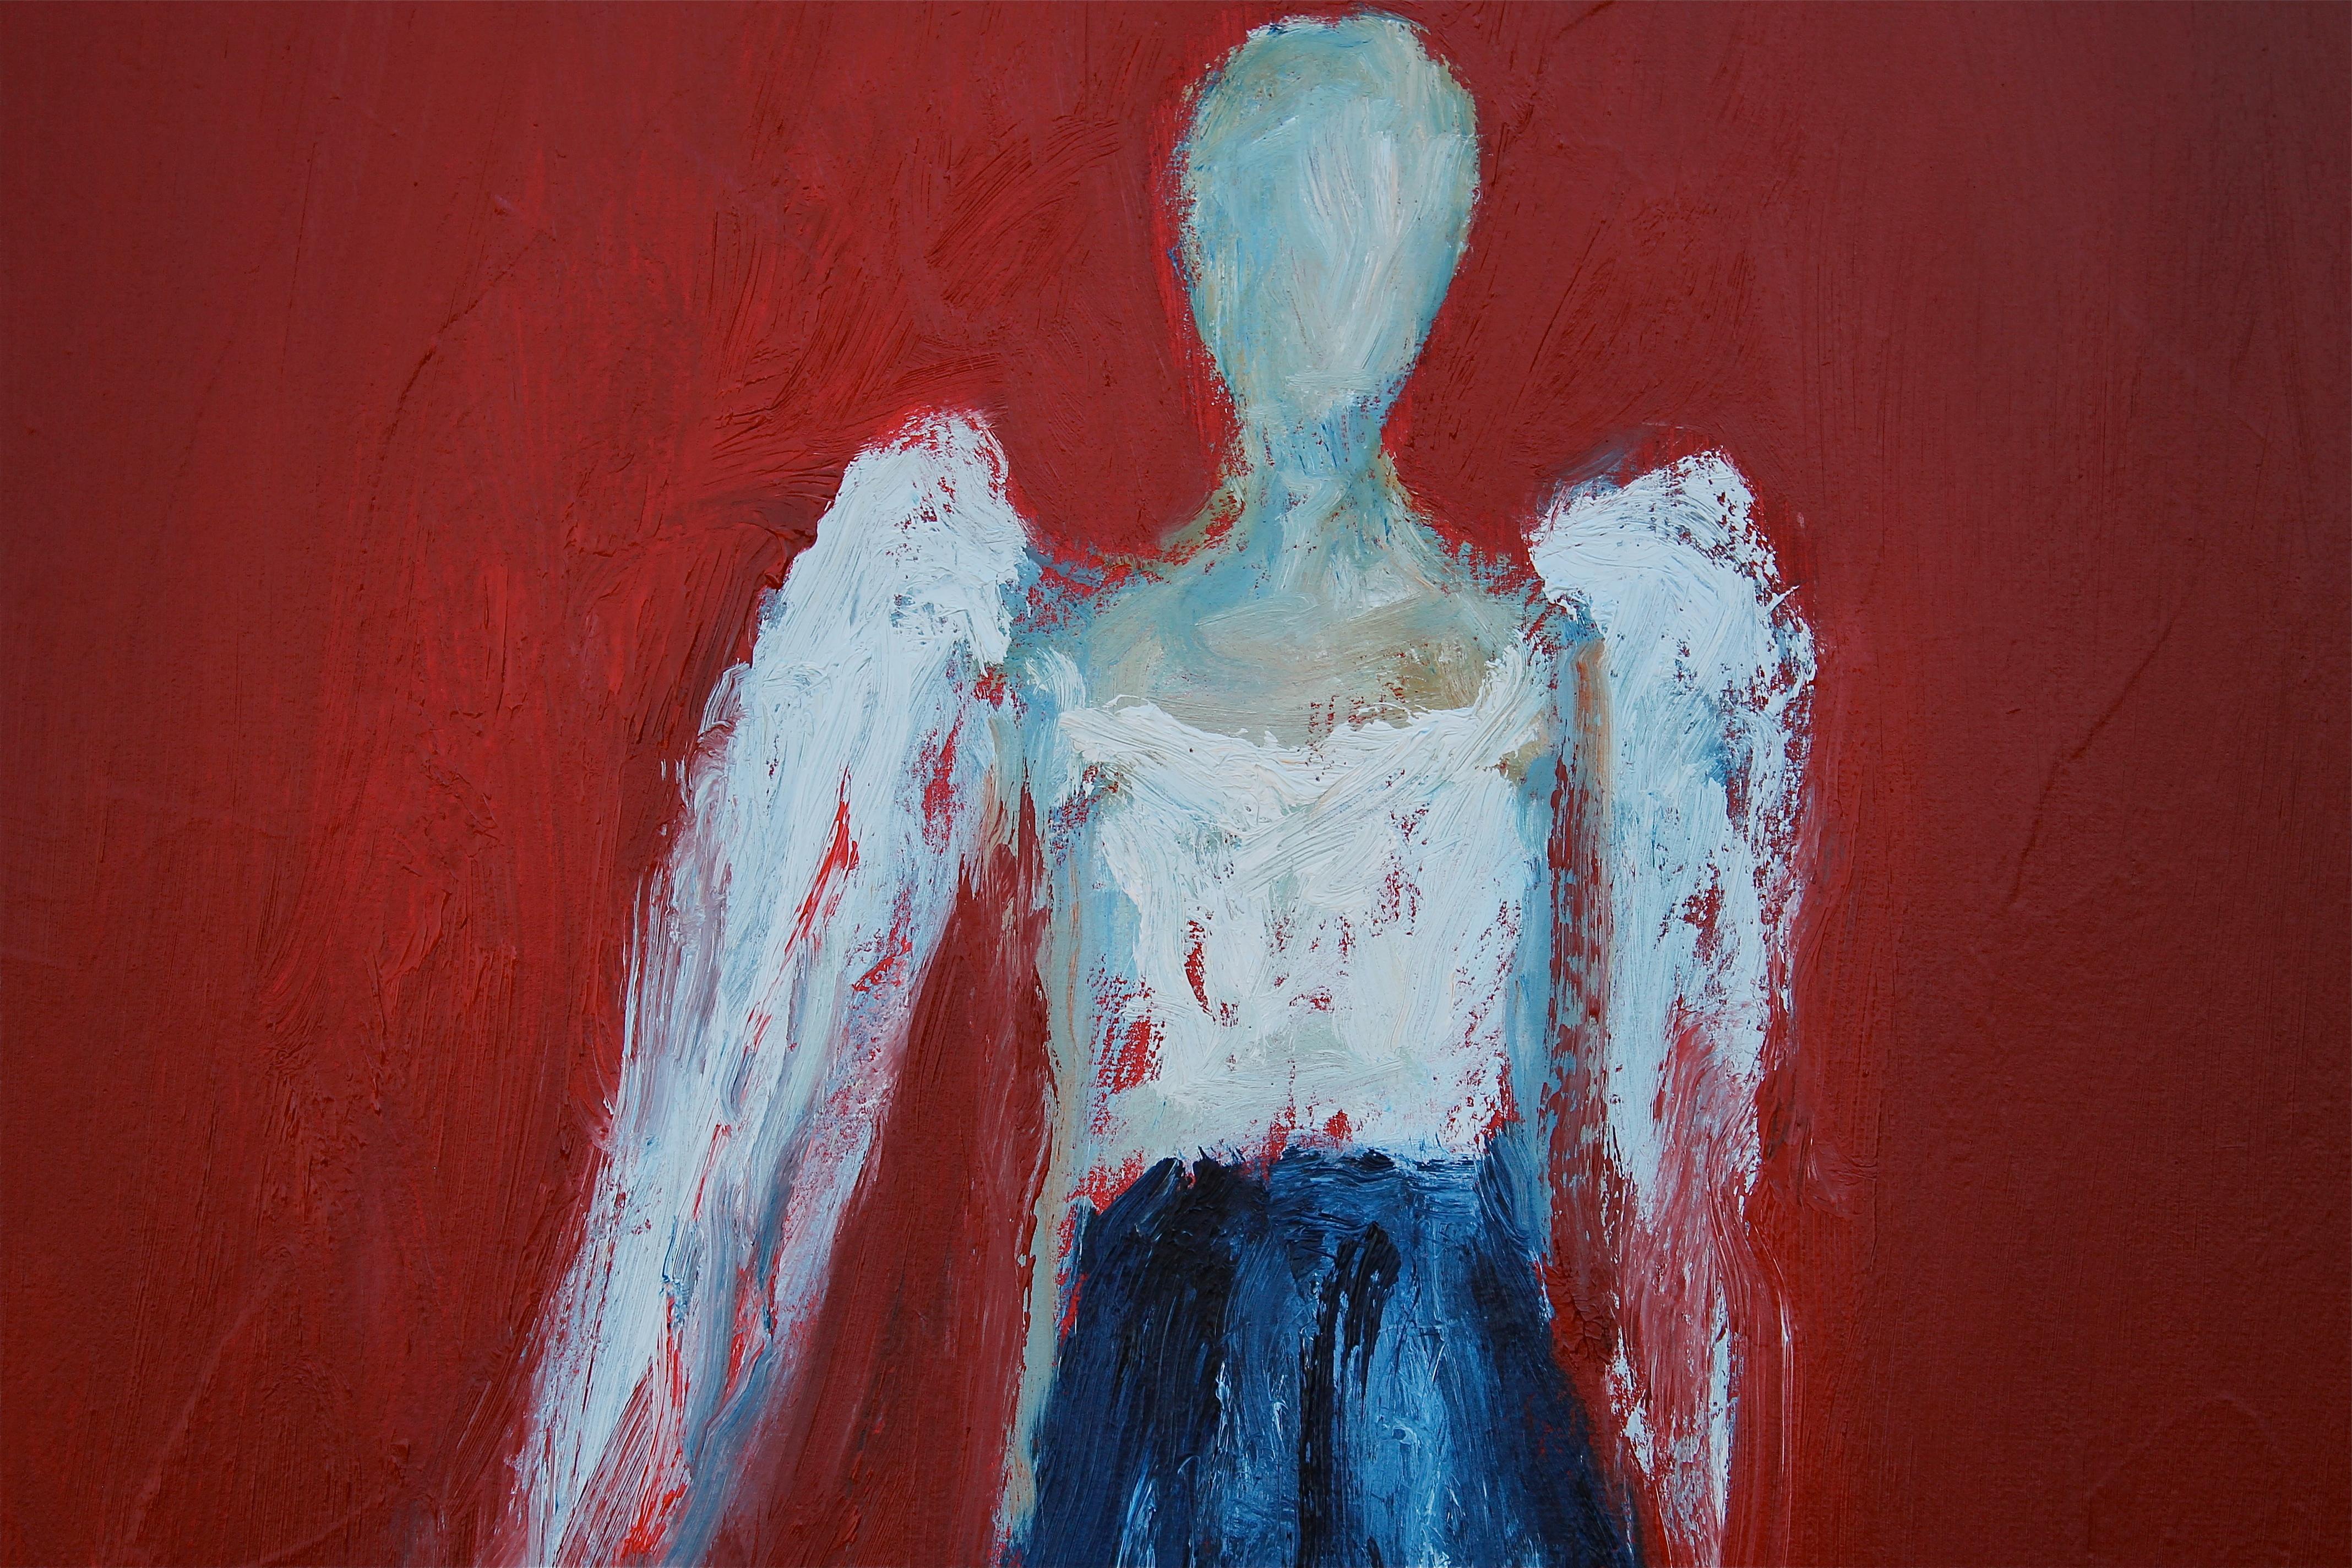 <p>Artist Comments<br />Part of artist Naoko Paluszak's signature series Who Are These Angels. A diaphanous figure appears to be swaying on her feet. Focused light shimmers on her white and deep blue dress. The rich red background allows for the